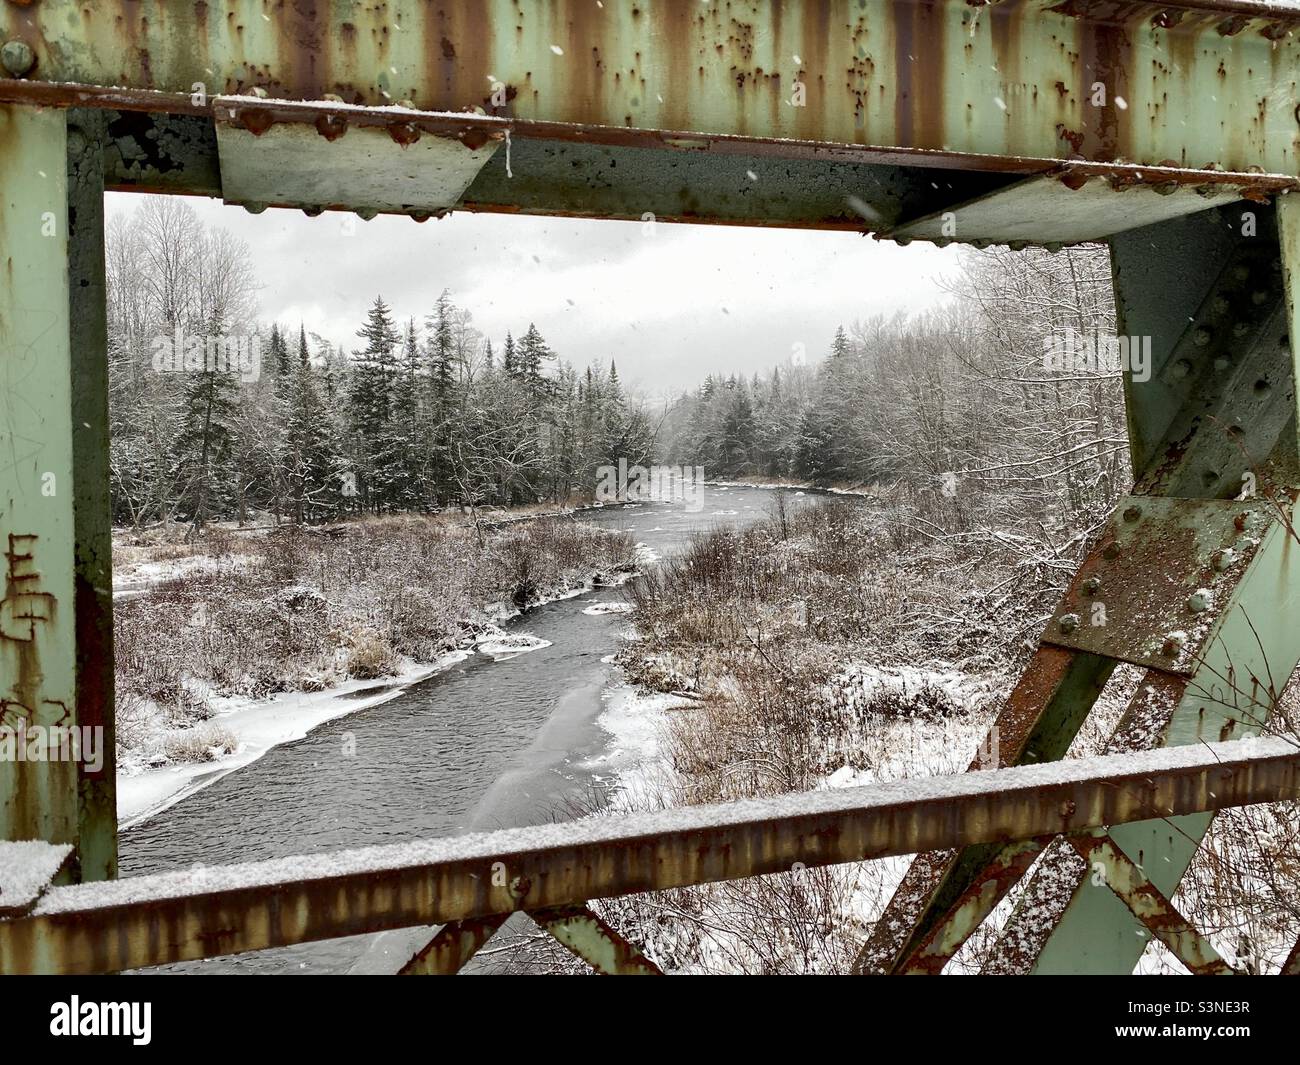 Sacandaga River in winter framed by an old rusted highway bridge Stock Photo